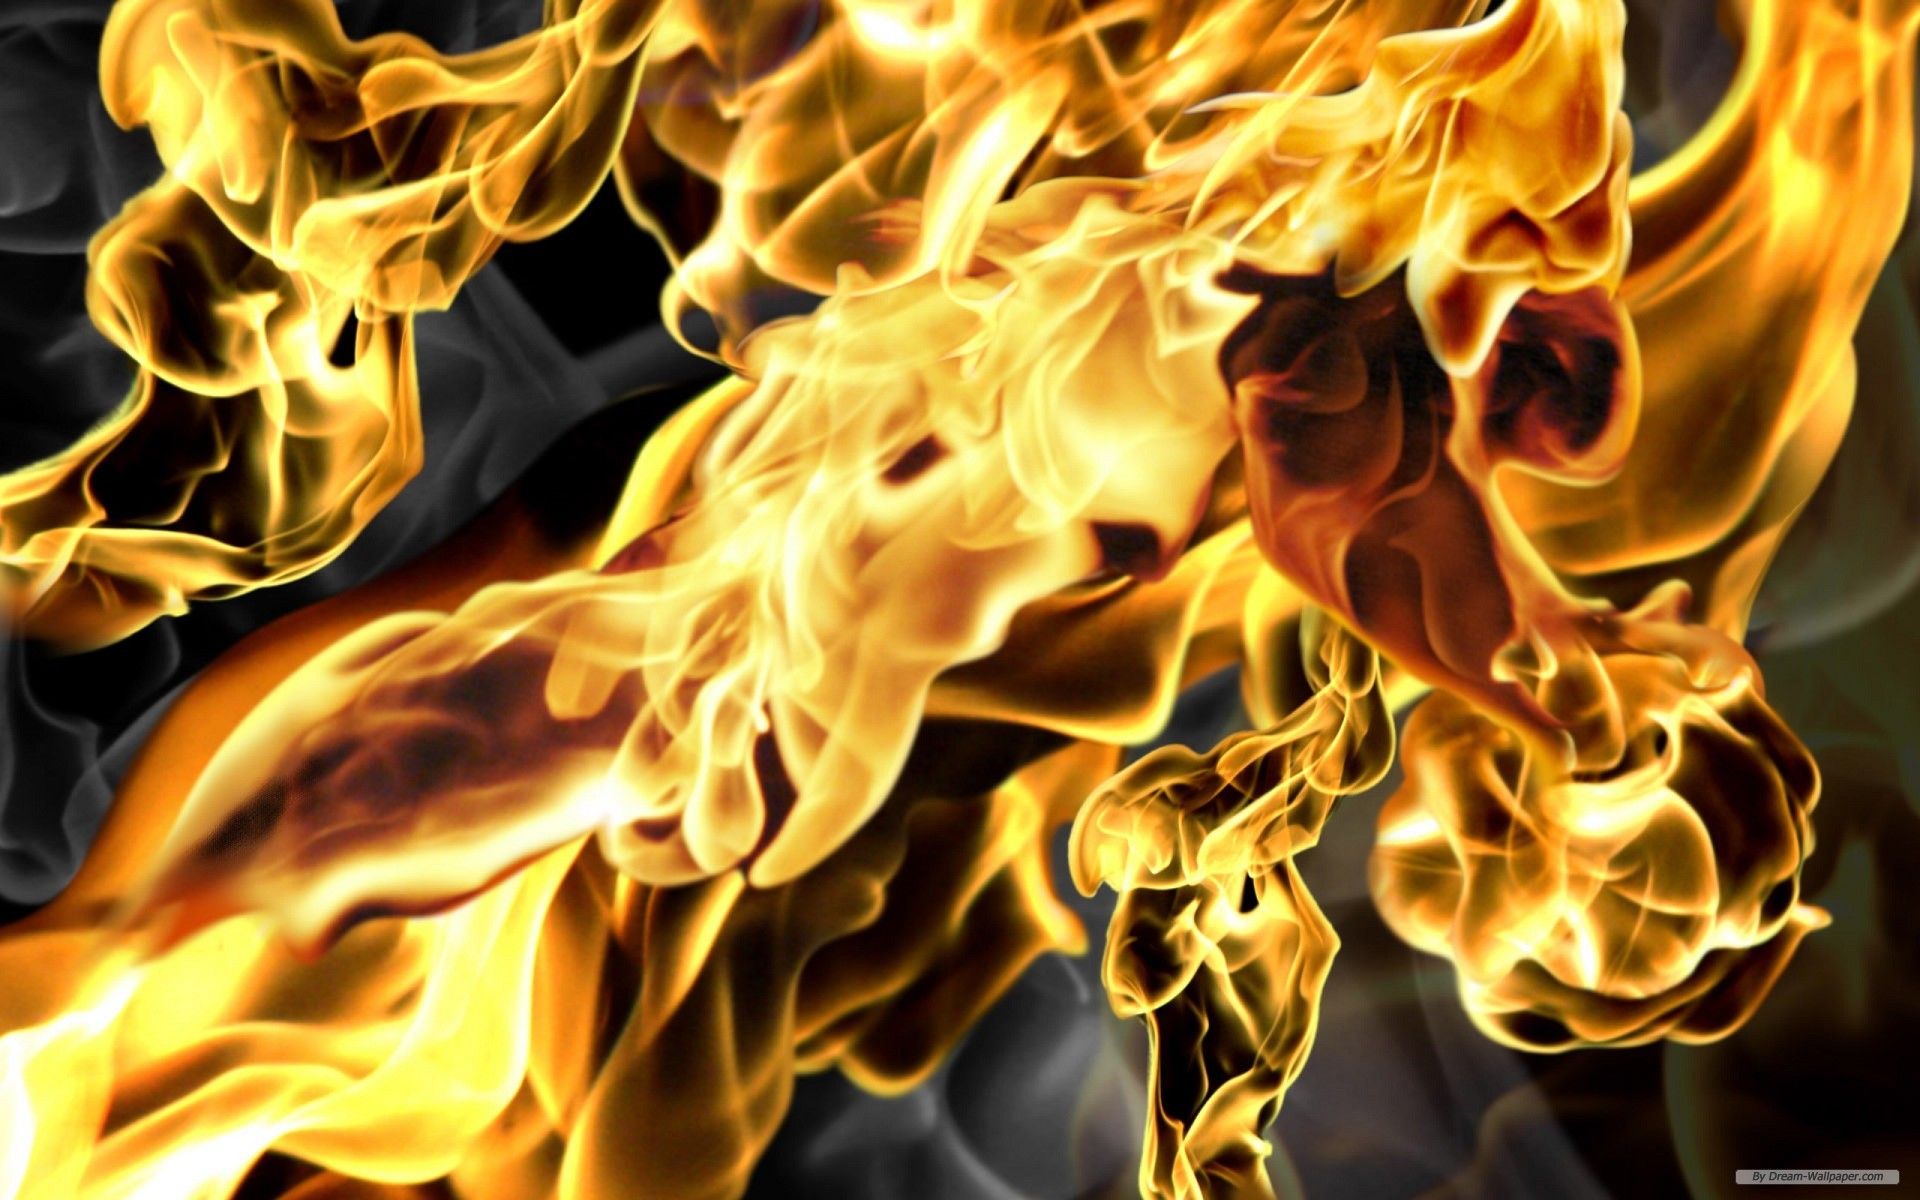 Free Wallpaper - Free Photography wallpaper - Close-up flame 3 ...